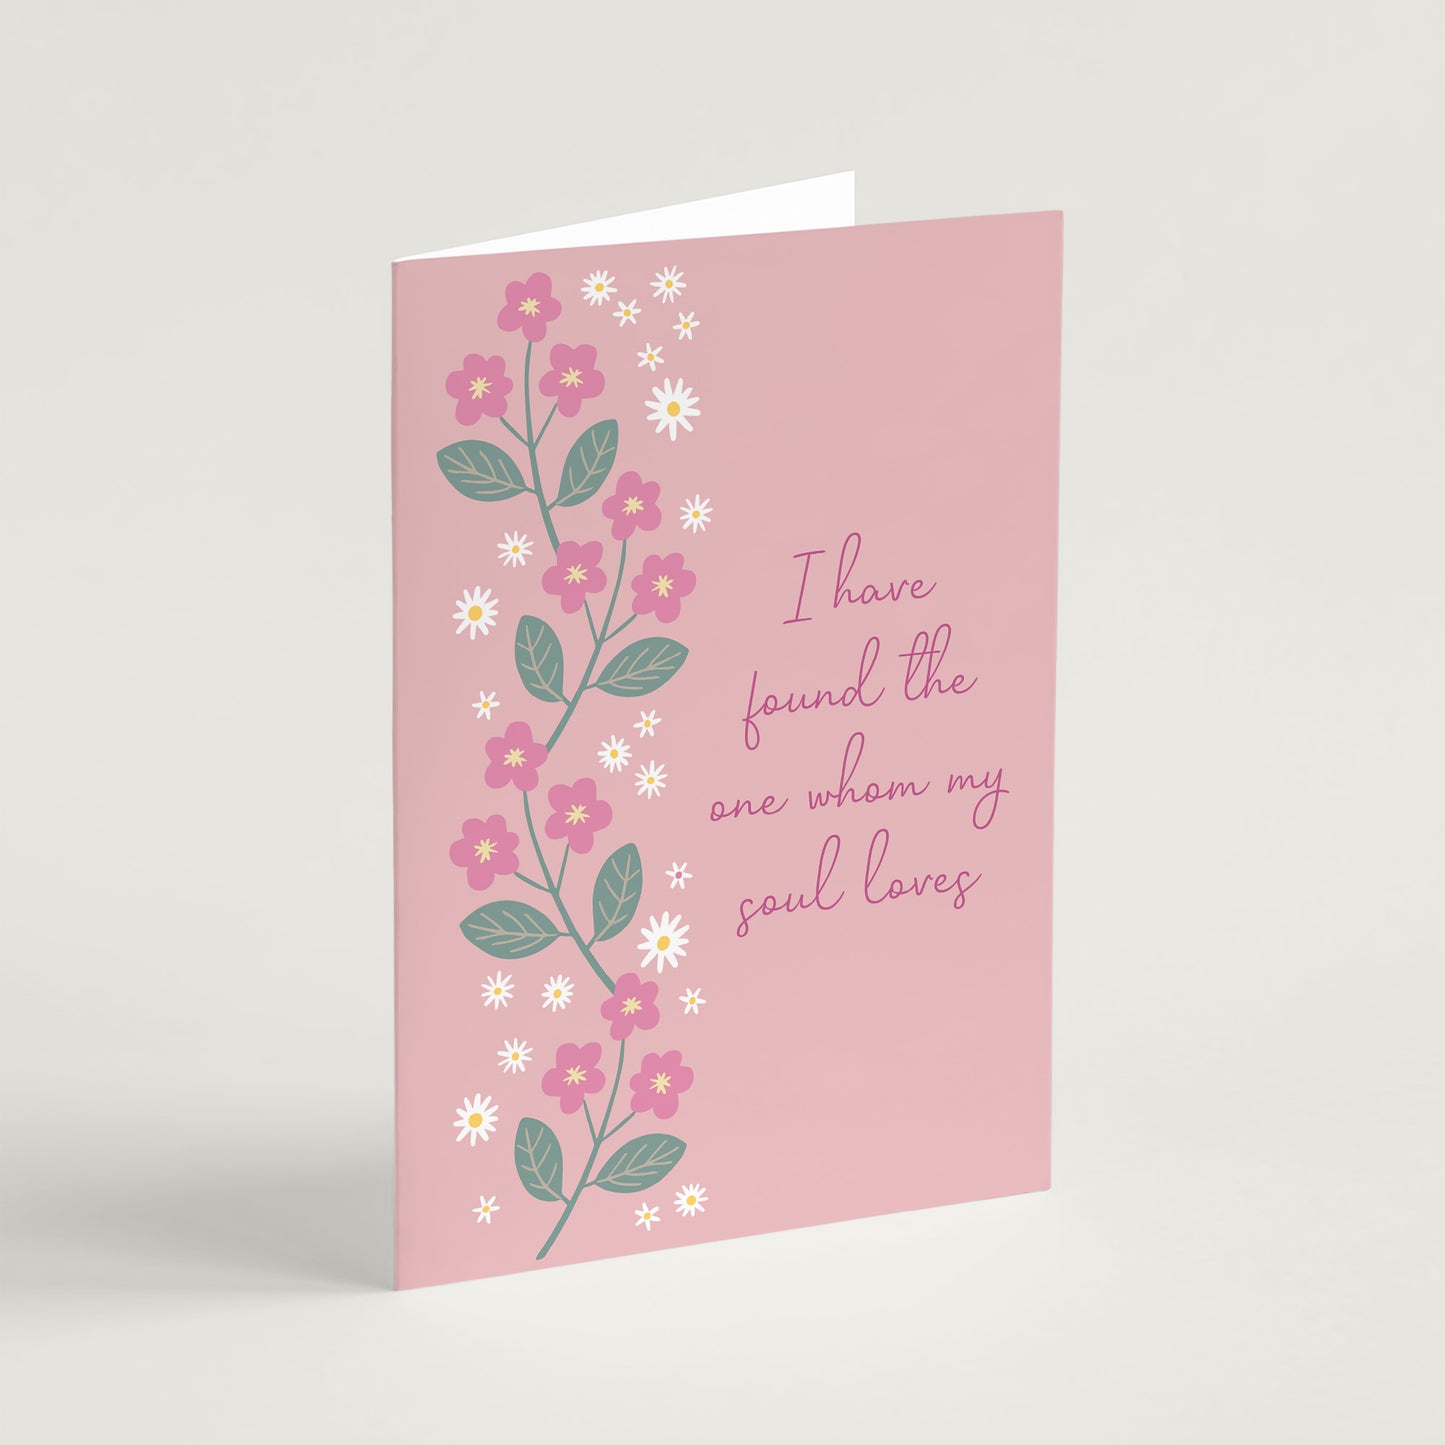 'I Have Found The One' Greeting Card & Envelope